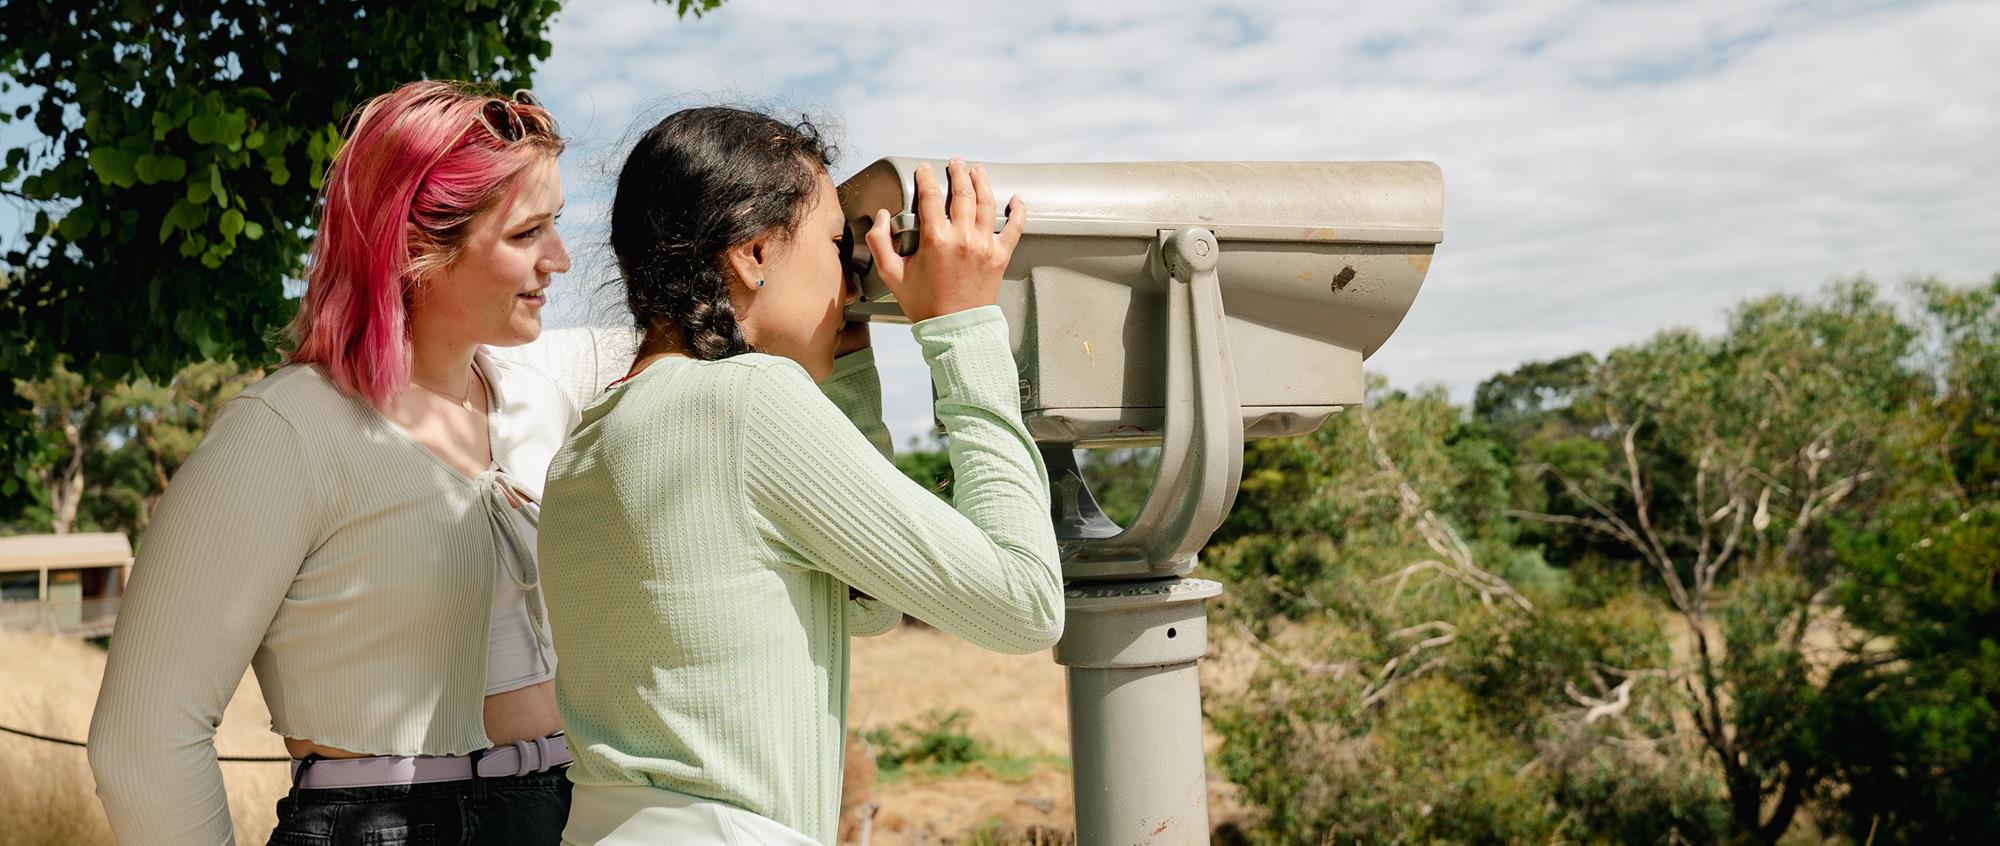 Two guests at a binocular view-post, with one looking through it toward shrubbery to the right.